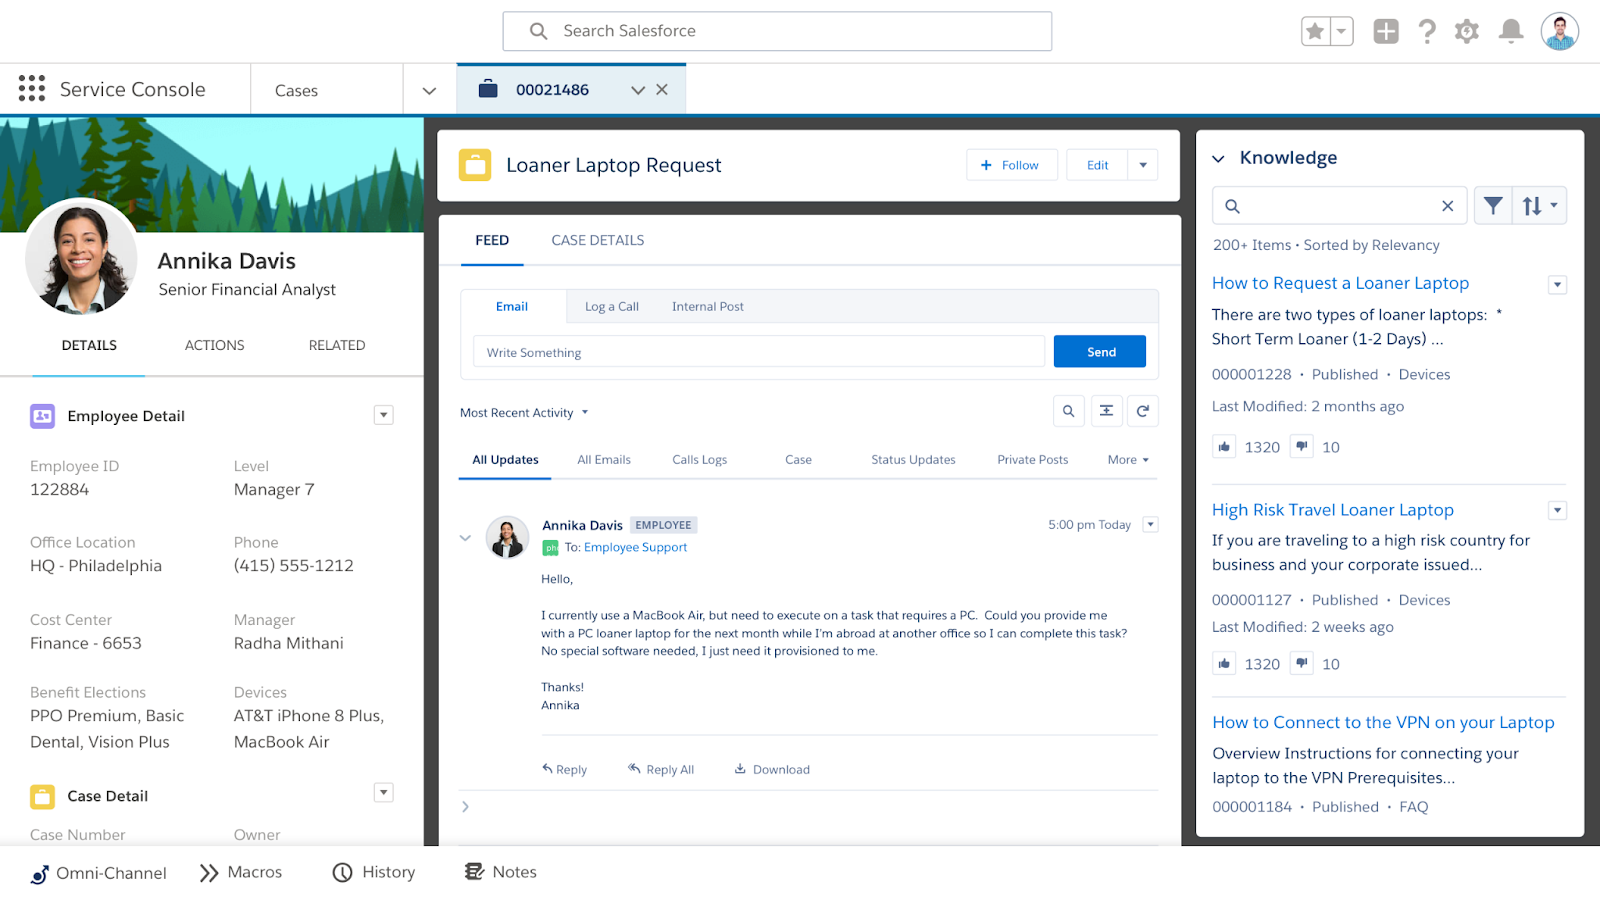 Image of Salesforce Service Cloud's user interface, a robust HappyFox alternative. The screen is divided into three sections. On the left, there's a profile of Annika Davis, a senior financial analyst, displaying her employee details, office location, and devices used. The center section shows an open case titled 'Loaner Laptop Request' with an email exchange between Annika and employee support. To the right, a knowledge base is visible with articles such as 'How to Request a Loaner Laptop' and 'High-Risk Travel Loaner Laptop', providing quick access to relevant information.